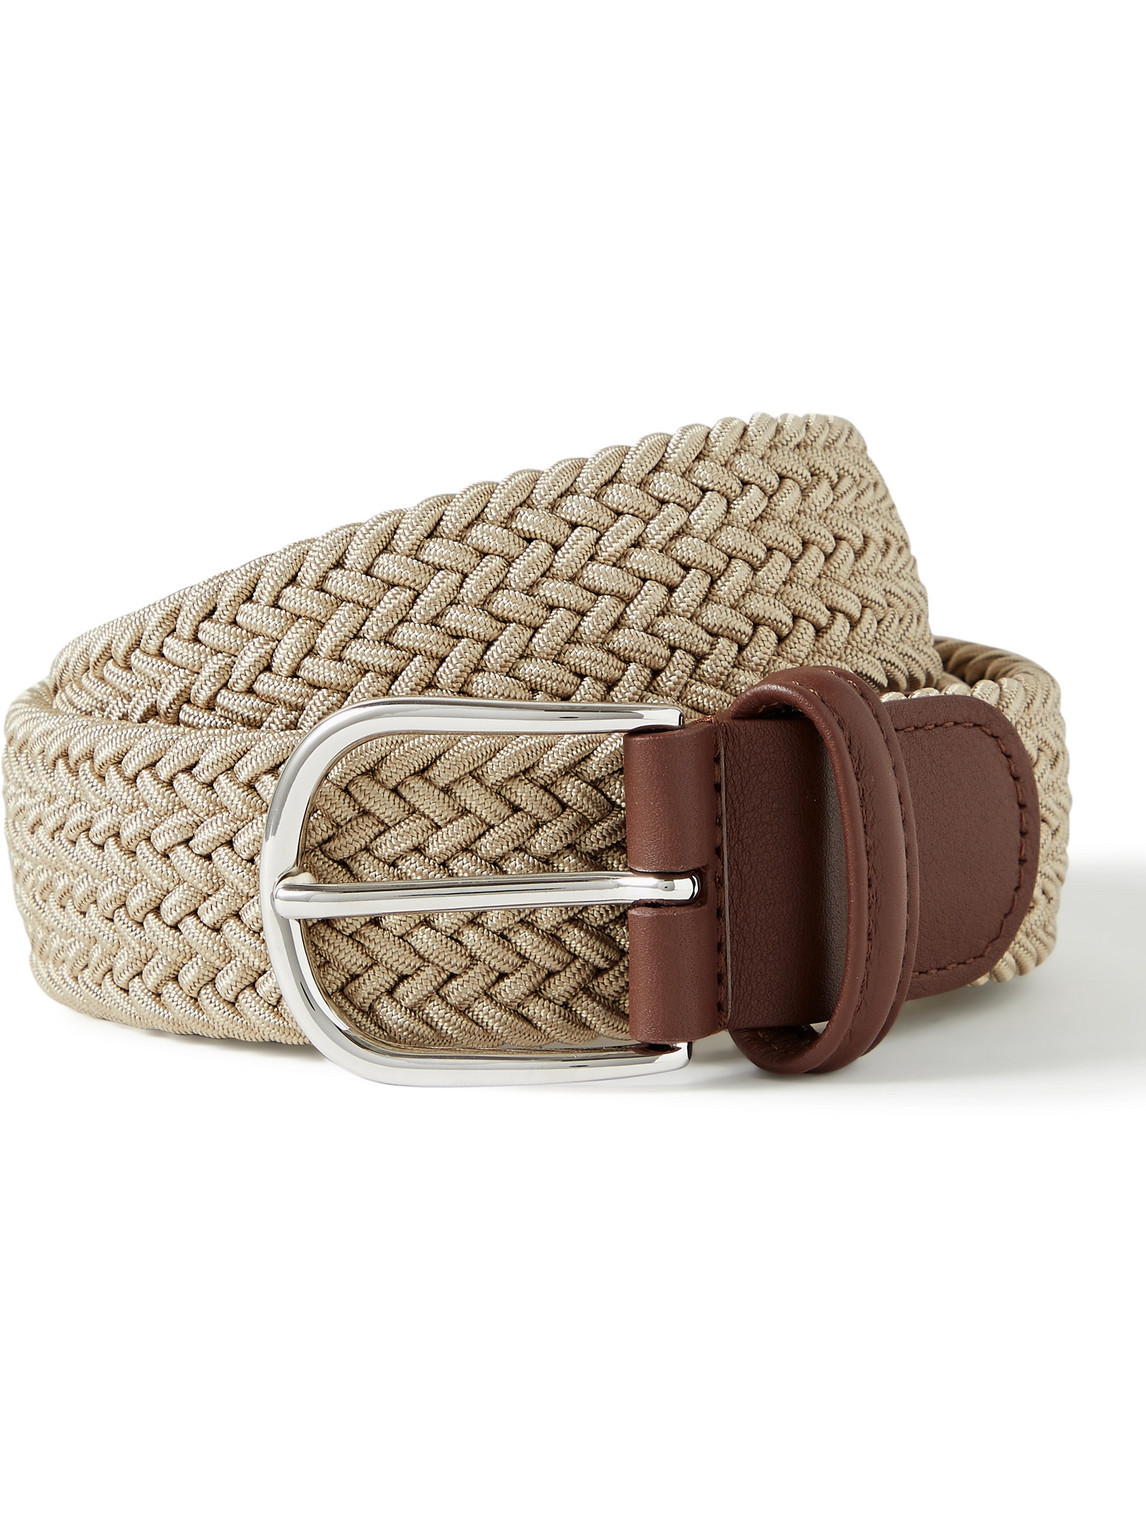 ANDERSON'S 3.5CM LEATHER-TRIMMED WOVEN ELASTIC BELT